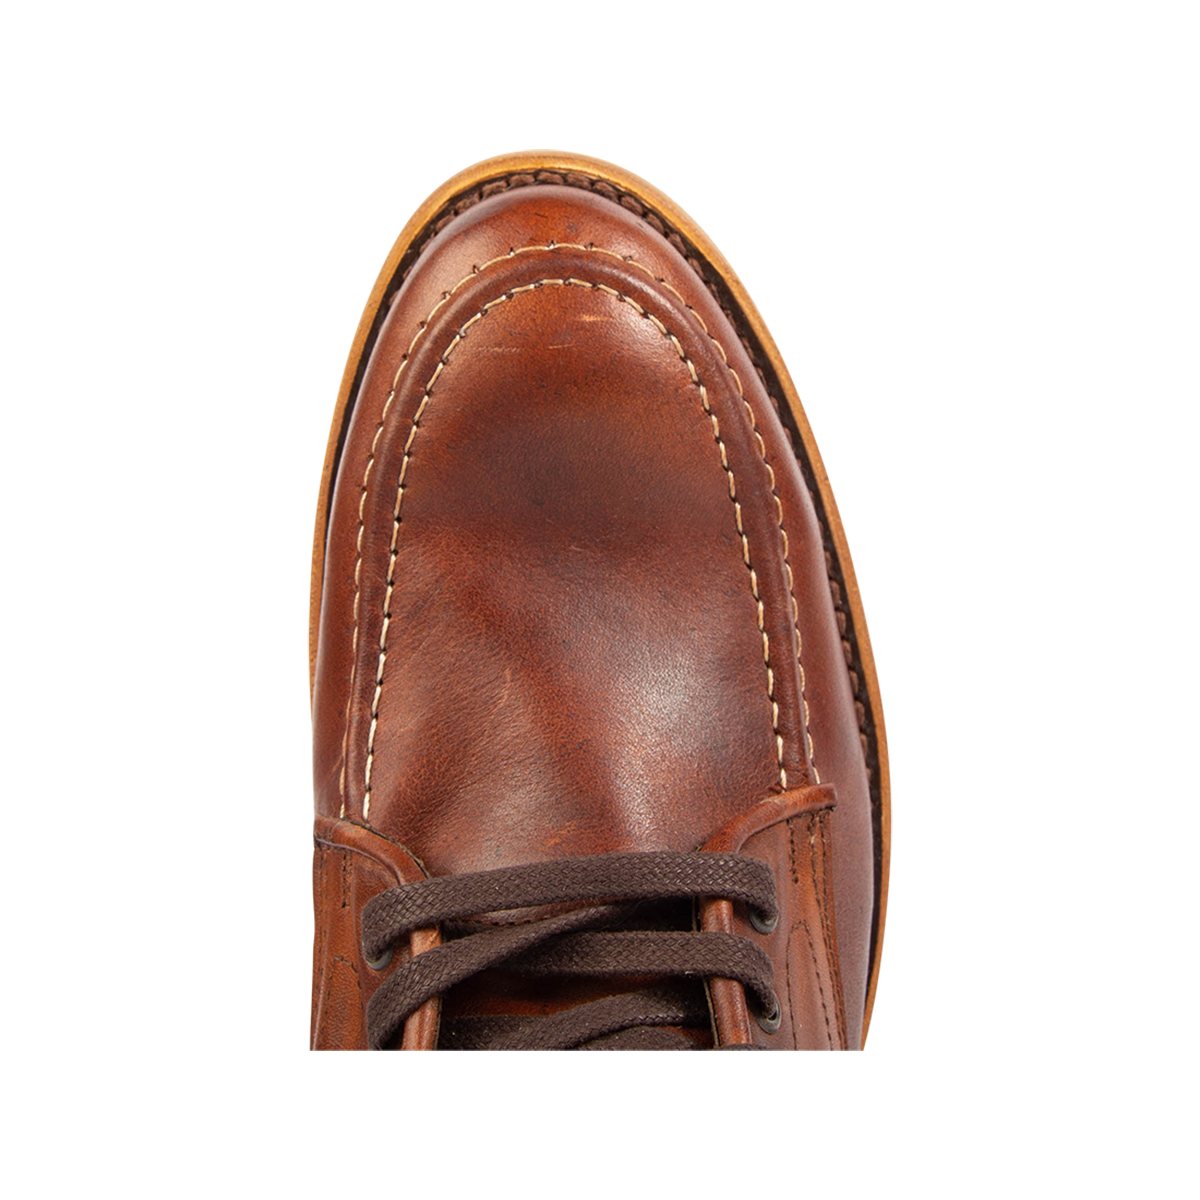 Top view showing stitch detailing and laces on FREEBIRD men's Benning cognac boot